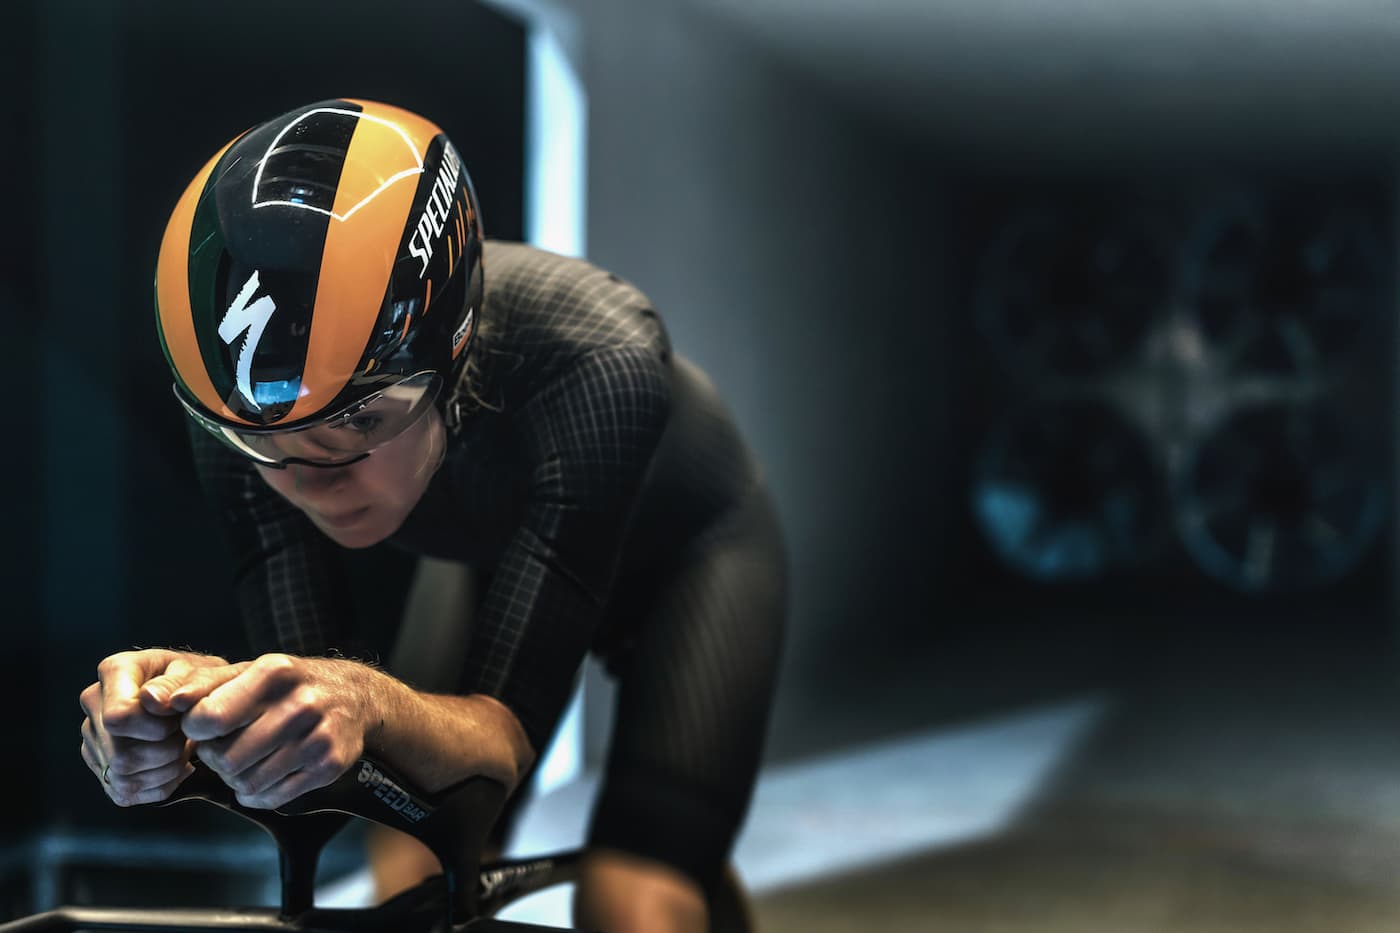 Bioracer UK Launches To Roll Out Custom Cycling Speedwear For All